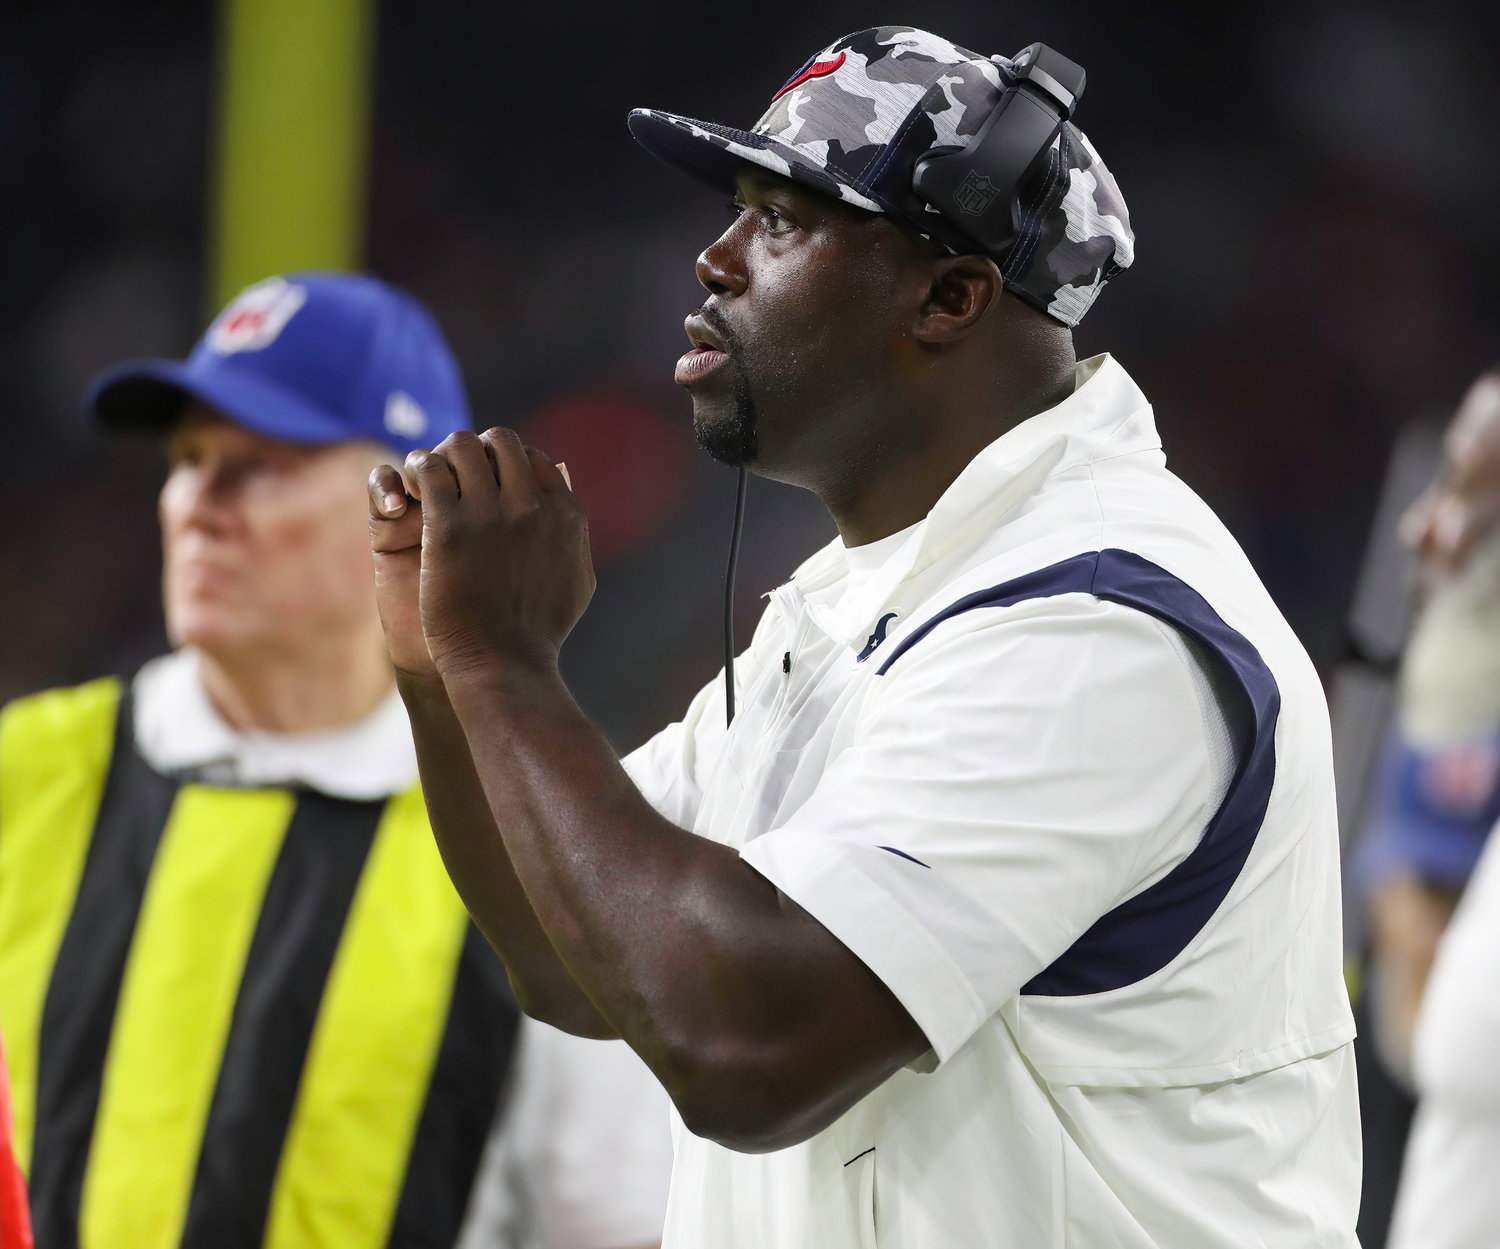 Houston Texans defensive line coach Jaques Cesaire during an NFL preseason game between the Texans and the 49ers in Houston, Texas, on August 25, 2022.